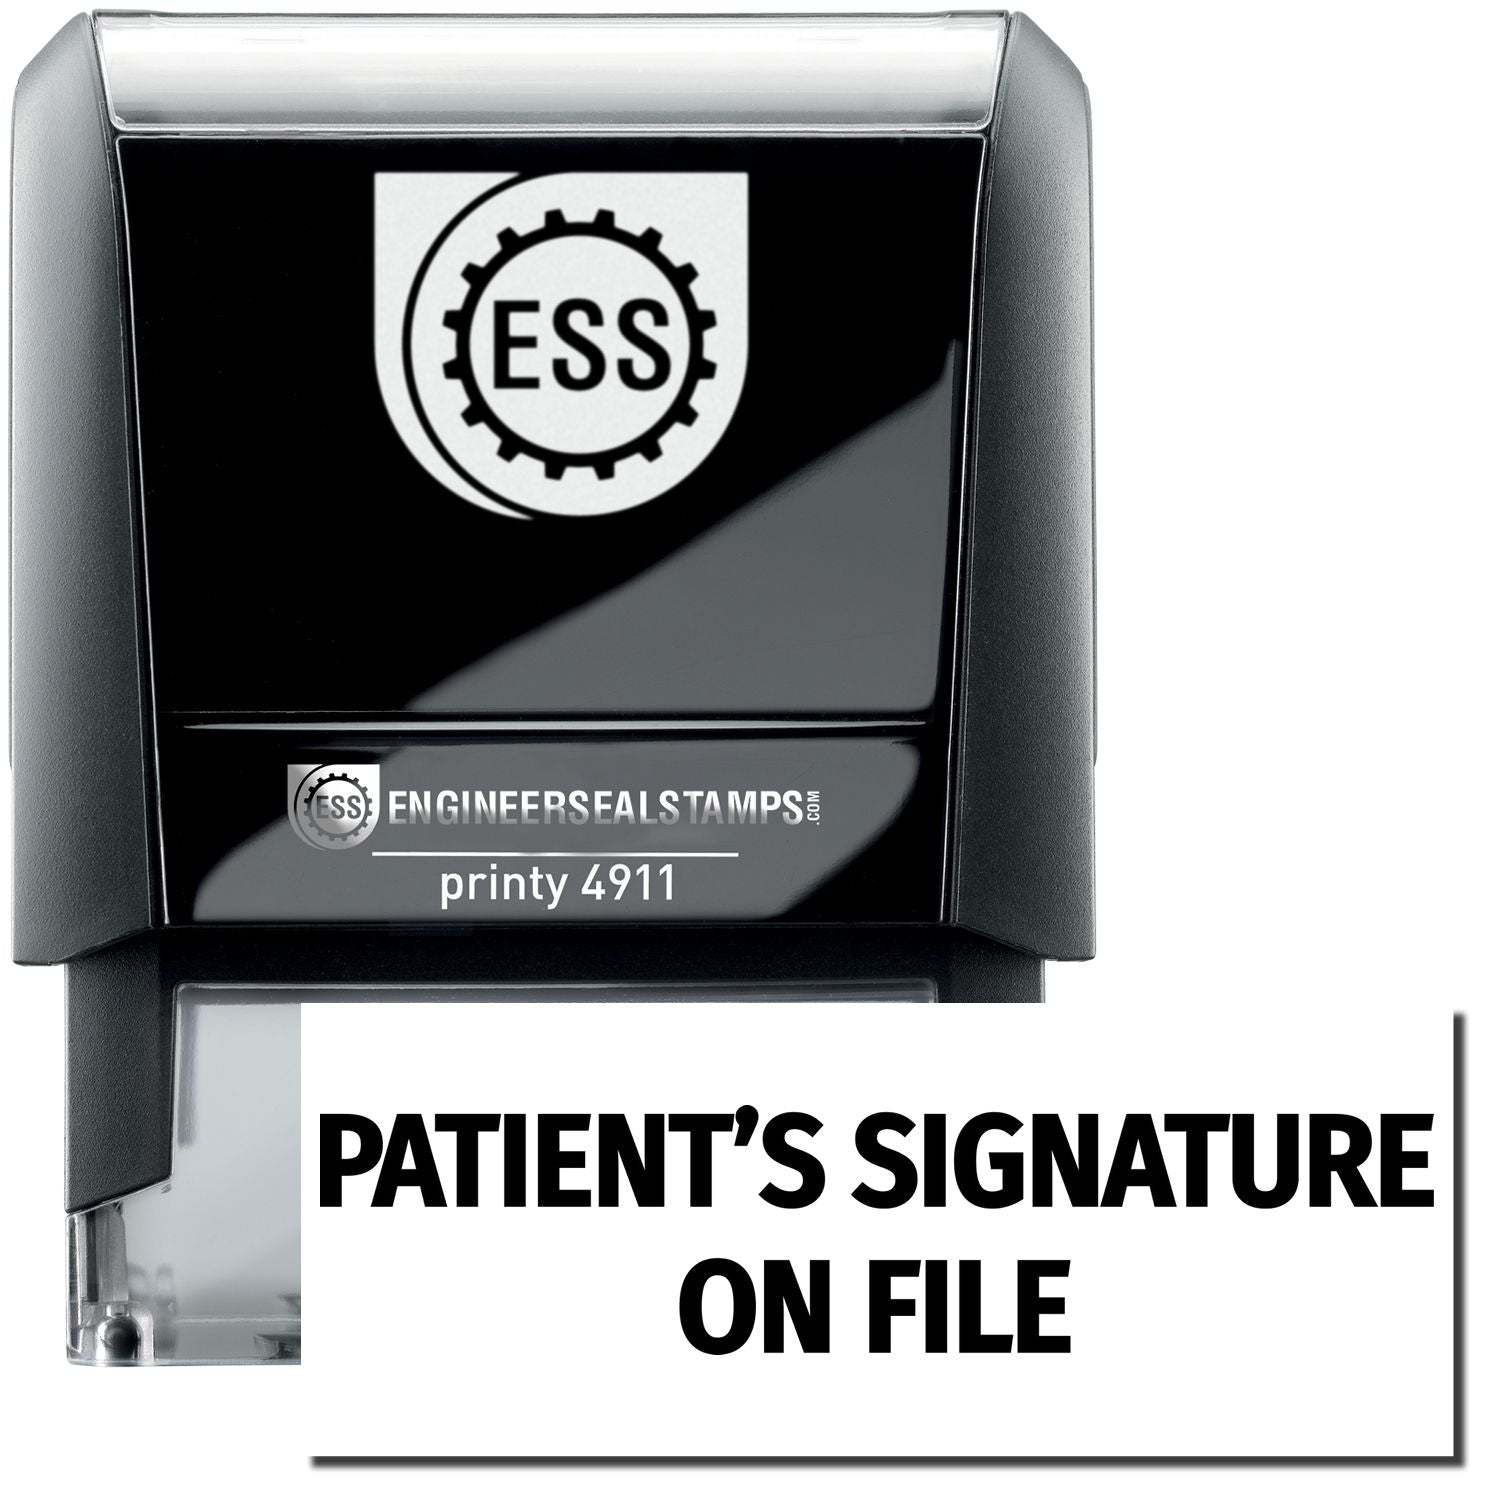 A self-inking stamp with a stamped image showing how the text "PATIENT'S SIGNATURE ON FILE" is displayed after stamping.